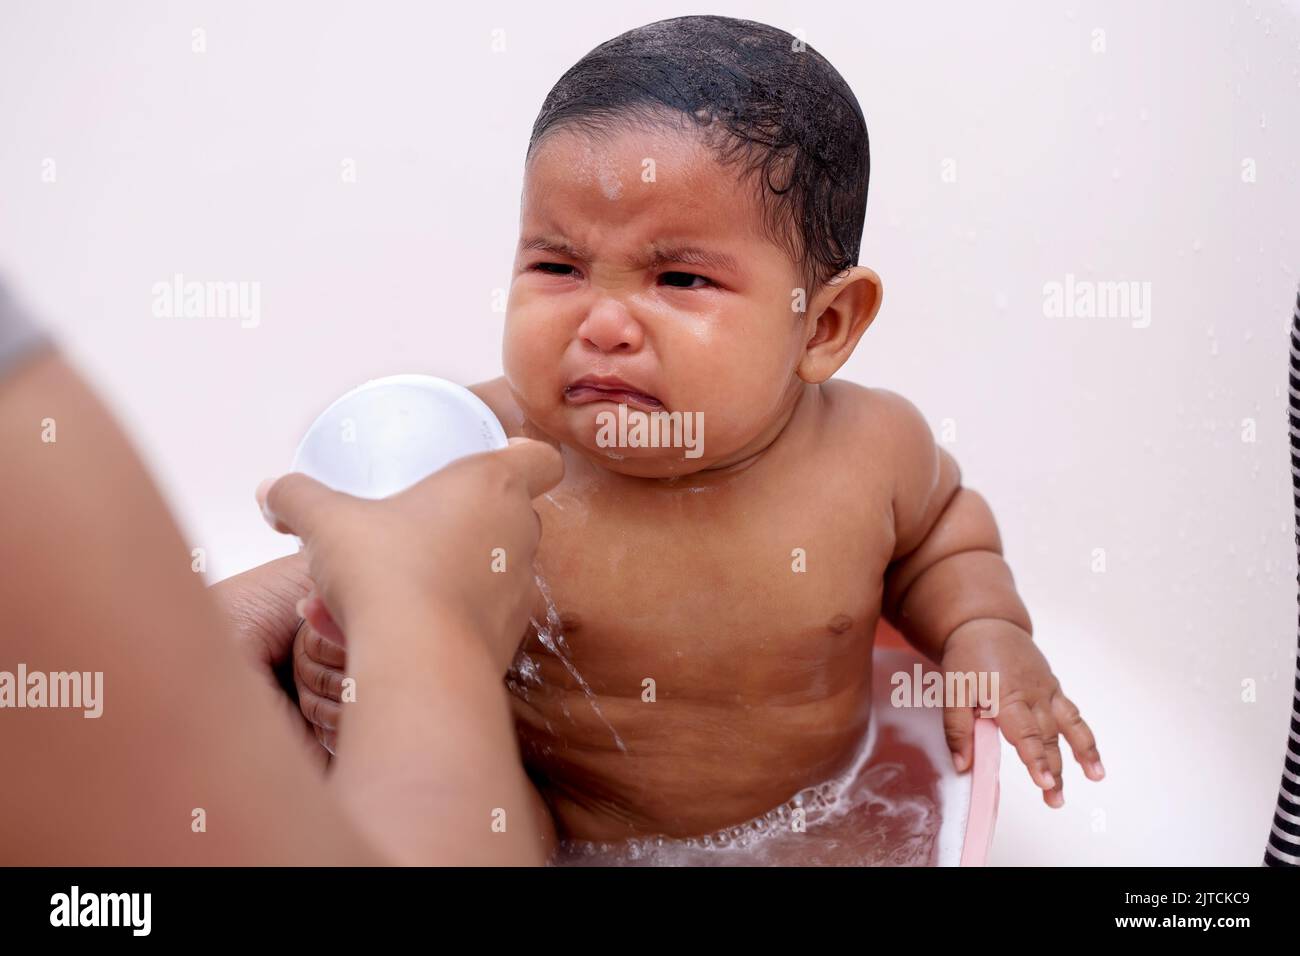 A baby crying during bath time that is upset due to water being sprayed by caregiver, to rinse the shampoo off her short hair. Stock Photo